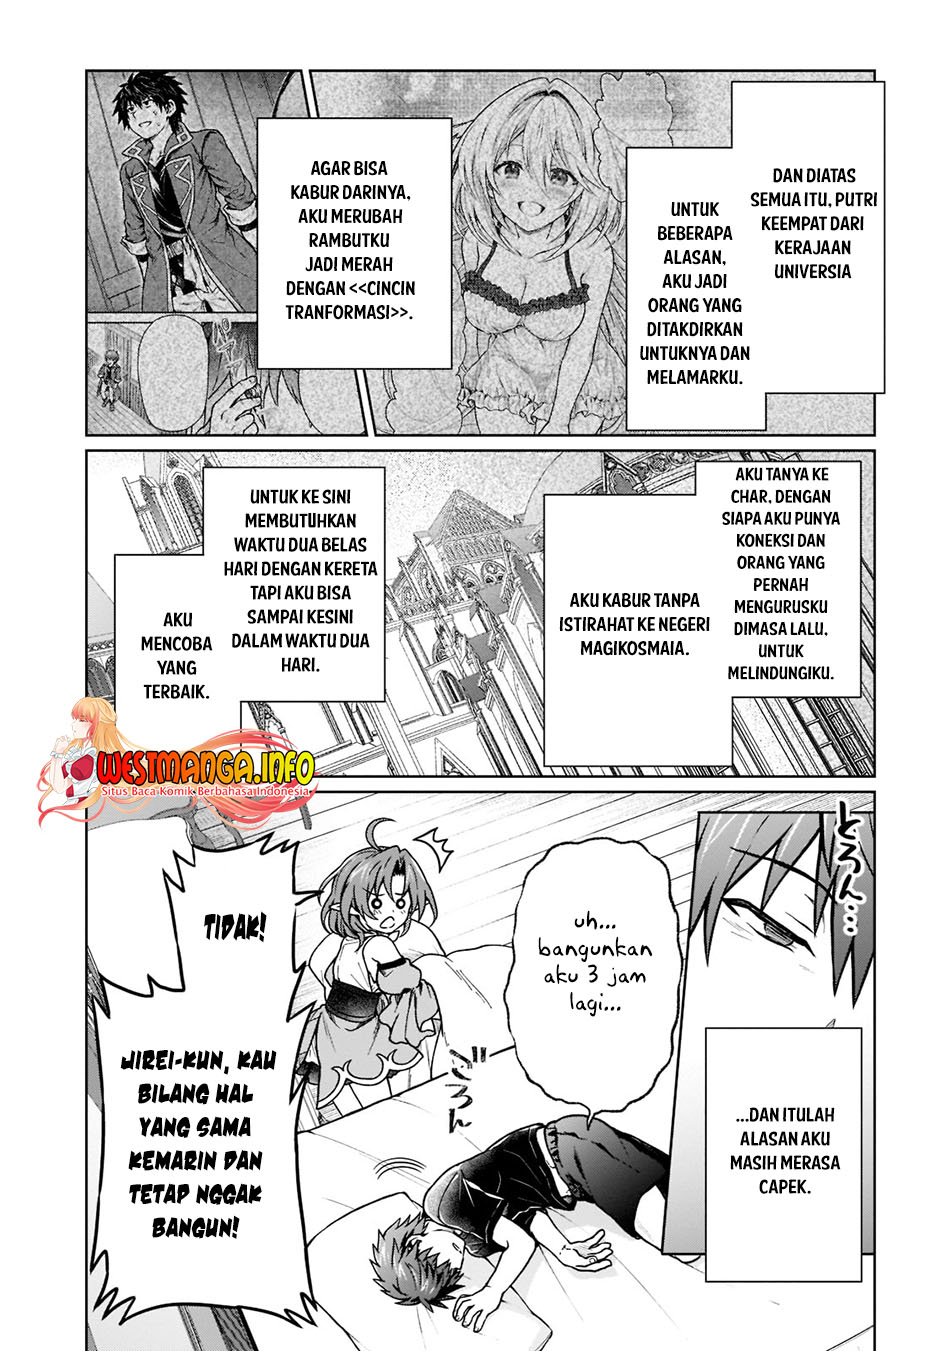 Dilarang COPAS - situs resmi www.mangacanblog.com - Komik d rank adventurer invited by a brave party and the stalking princess 015 - chapter 15 16 Indonesia d rank adventurer invited by a brave party and the stalking princess 015 - chapter 15 Terbaru 5|Baca Manga Komik Indonesia|Mangacan